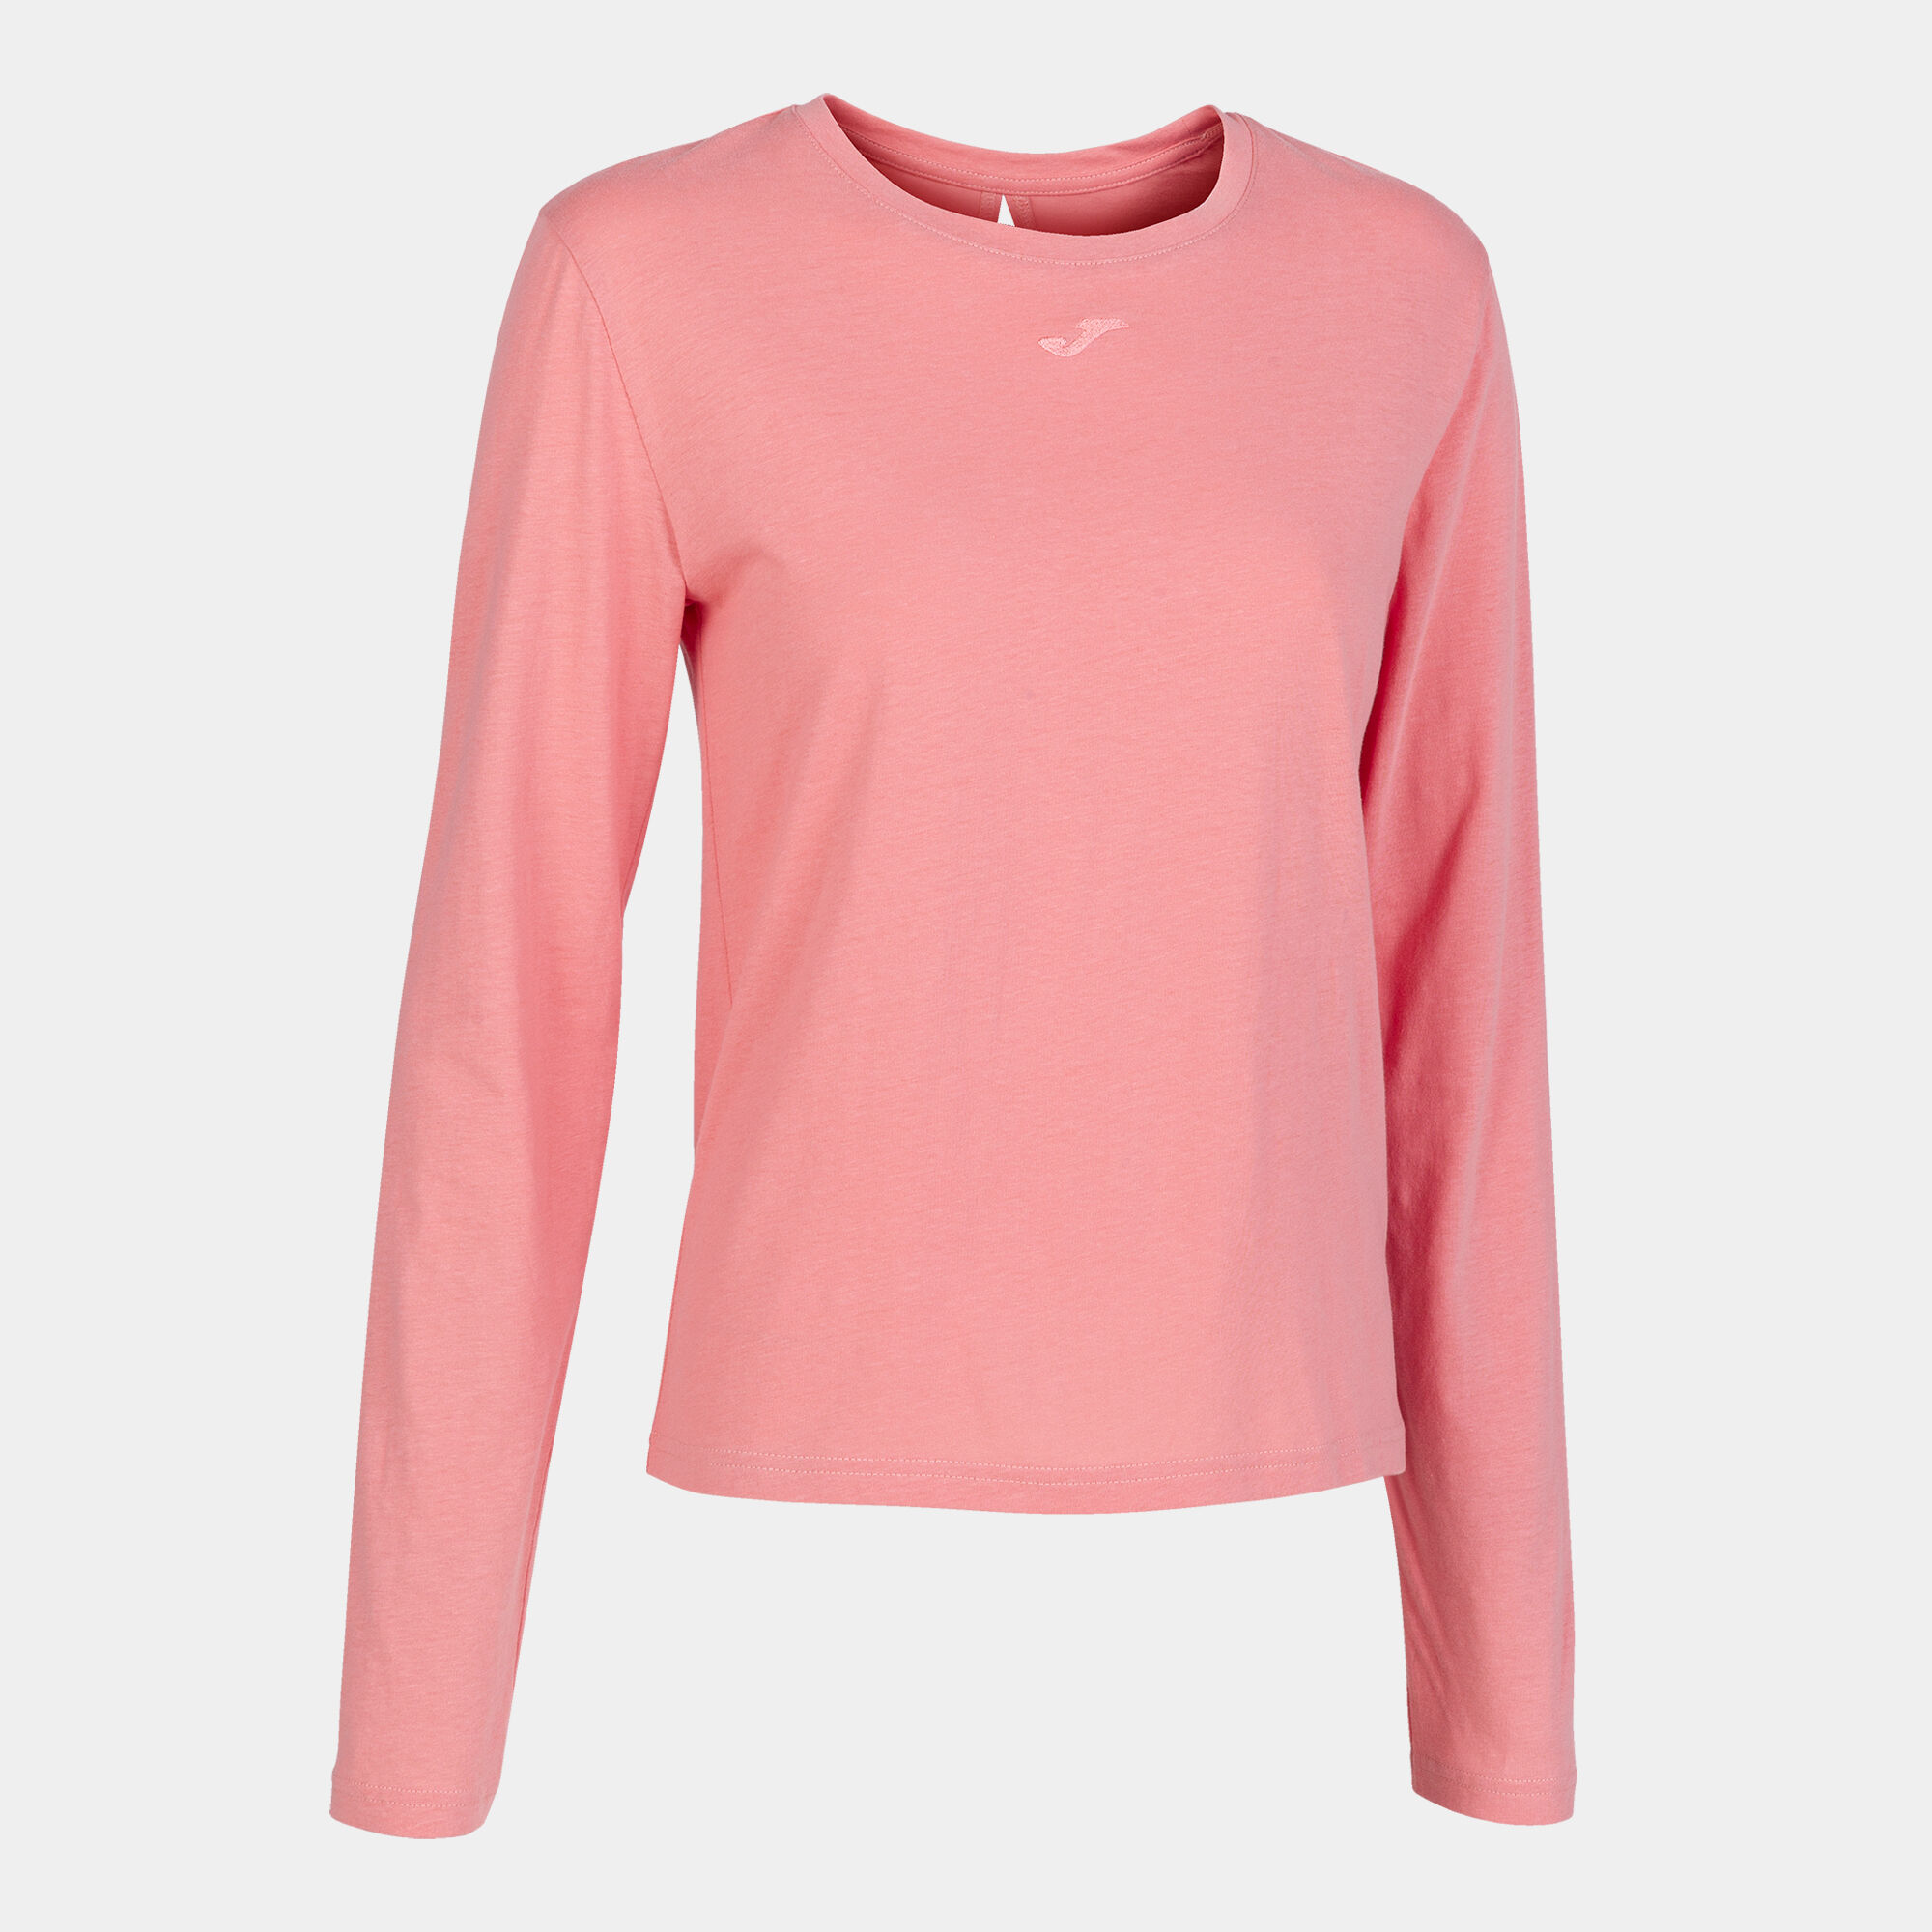 MAILLOT MANCHES LONGUES FEMME ORGANIC ROSE